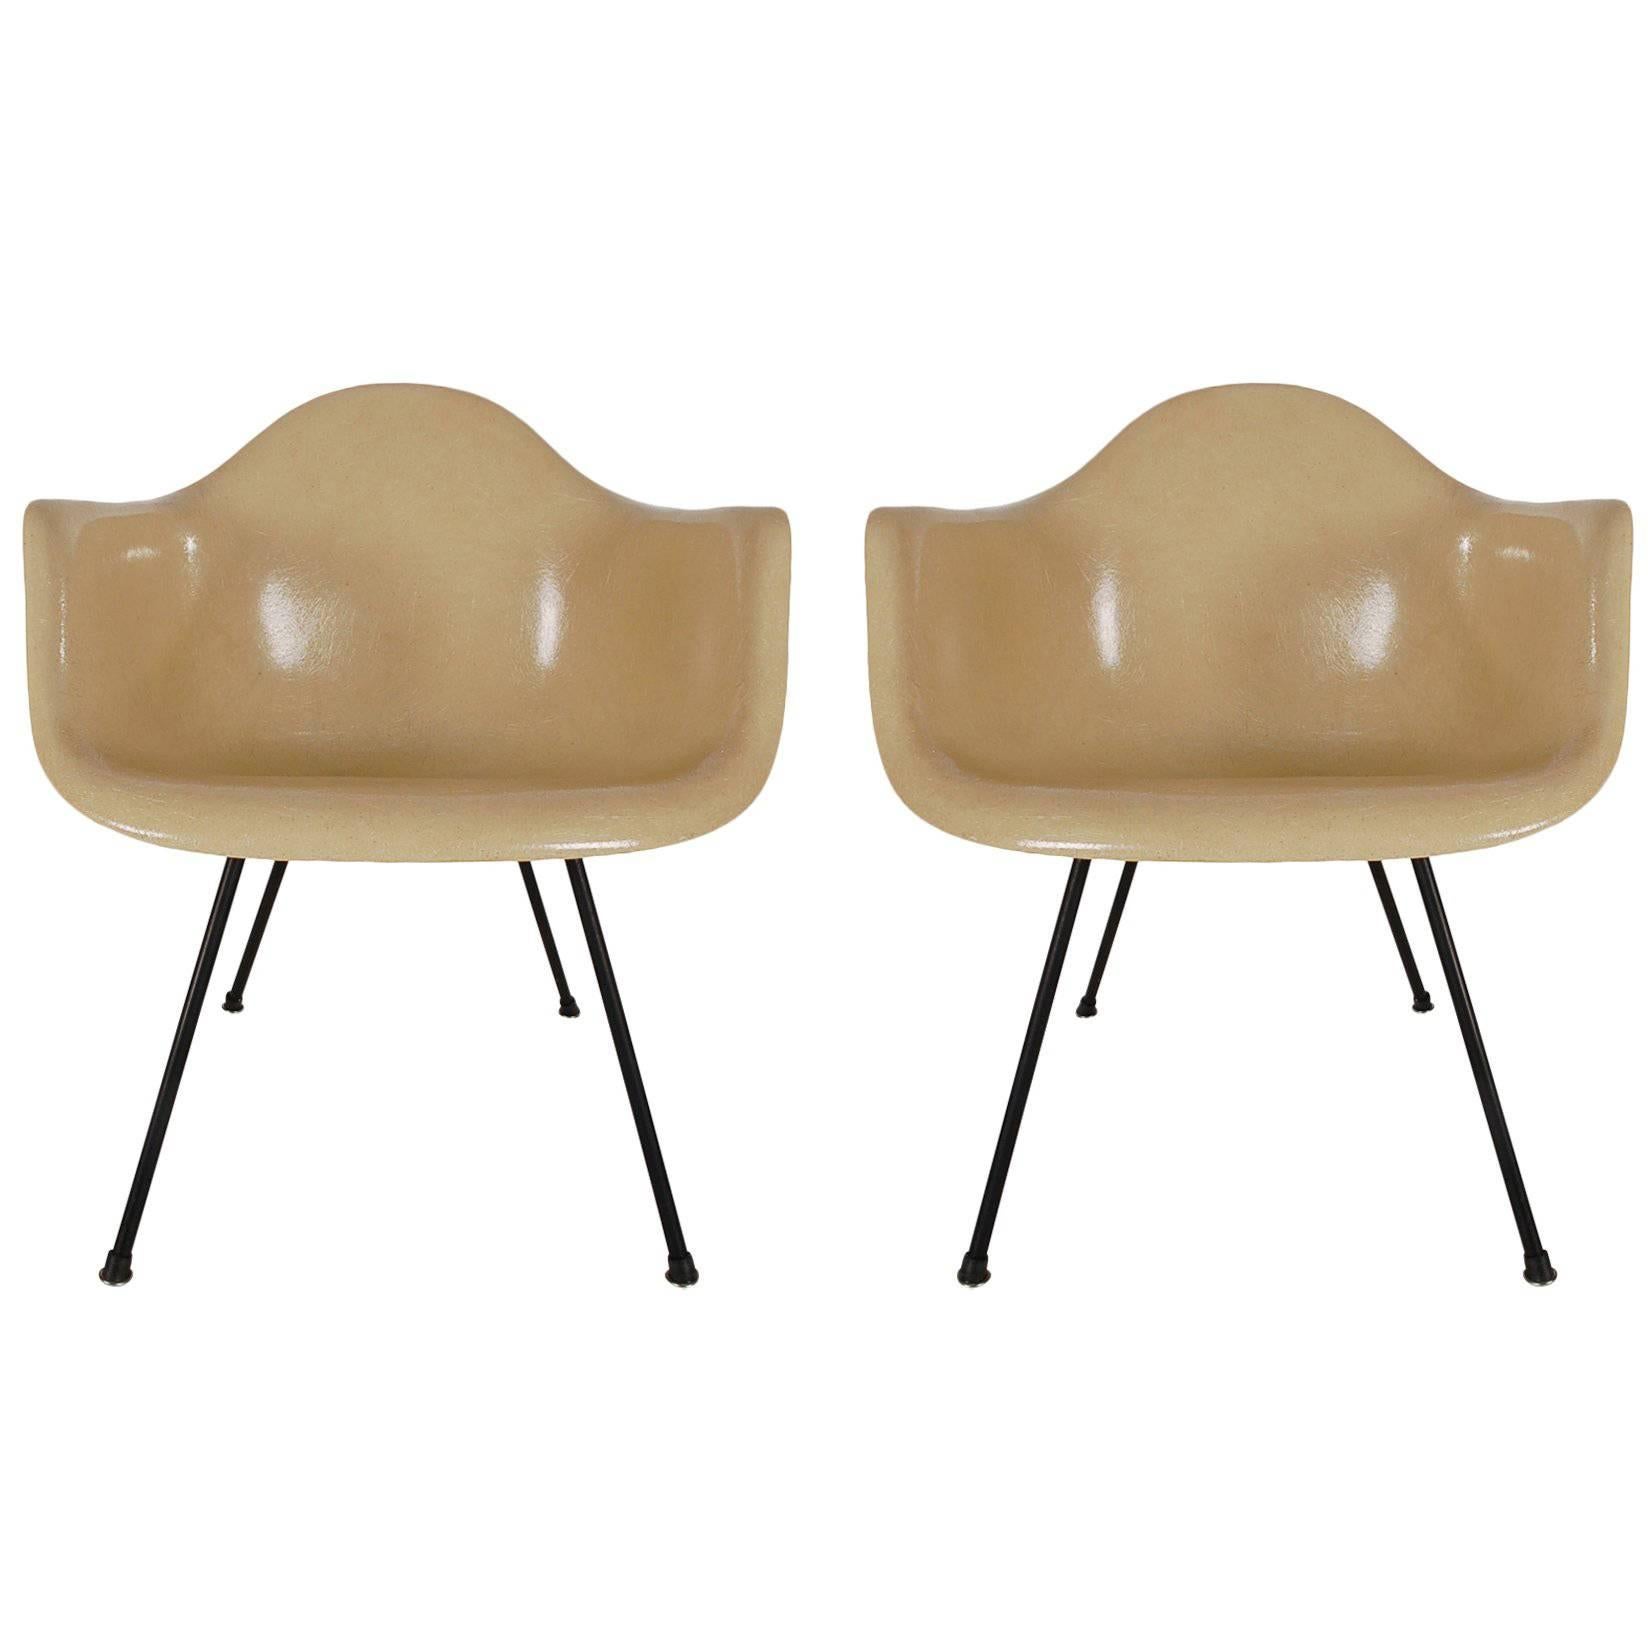 Early Second Generation Charles Eames for Herman Miller Zenith Lounge Chairs